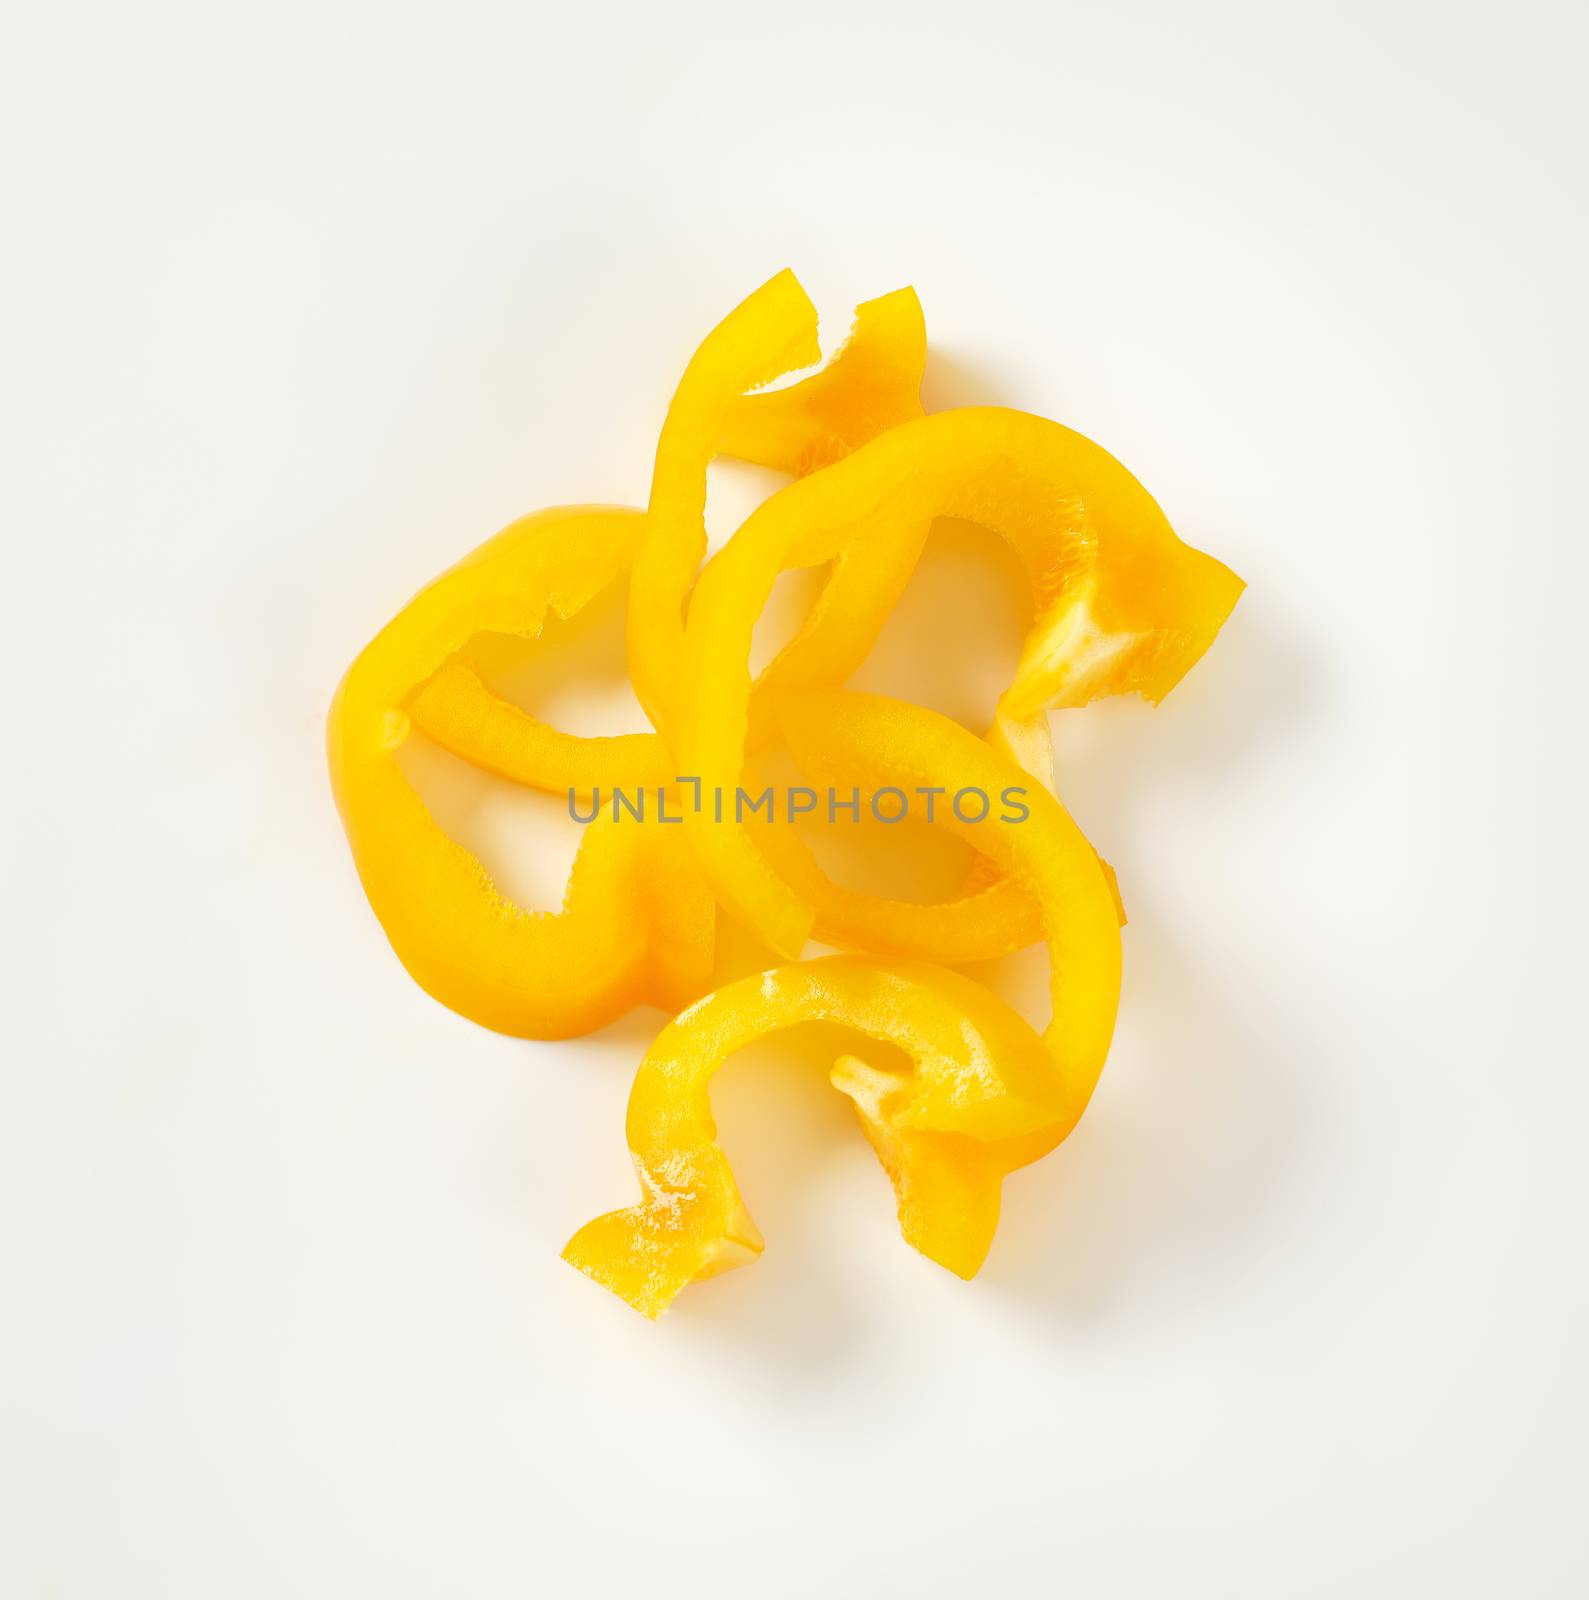 Thin slices of yellow bell pepper